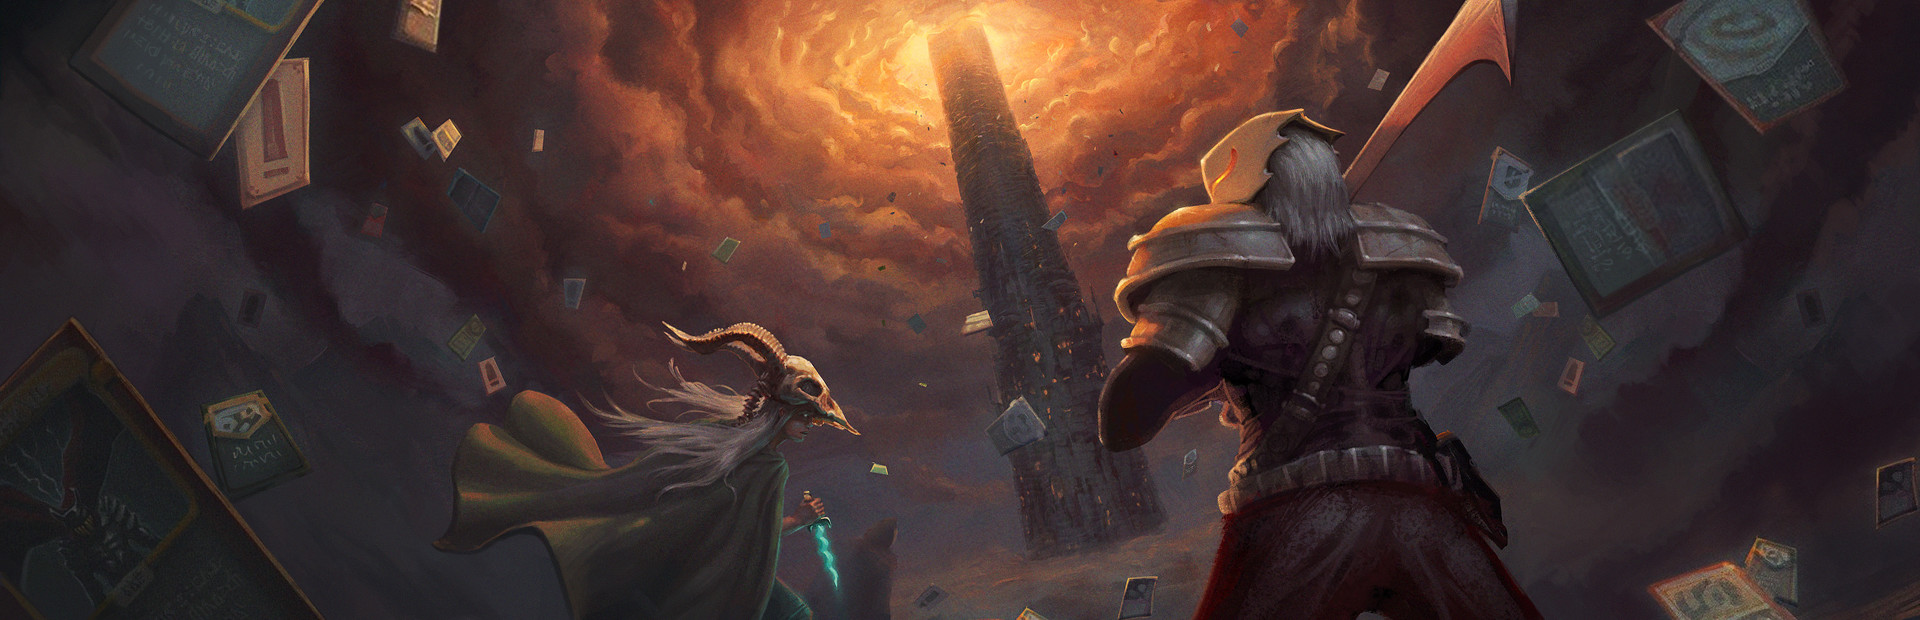 Slay the Spire cover image